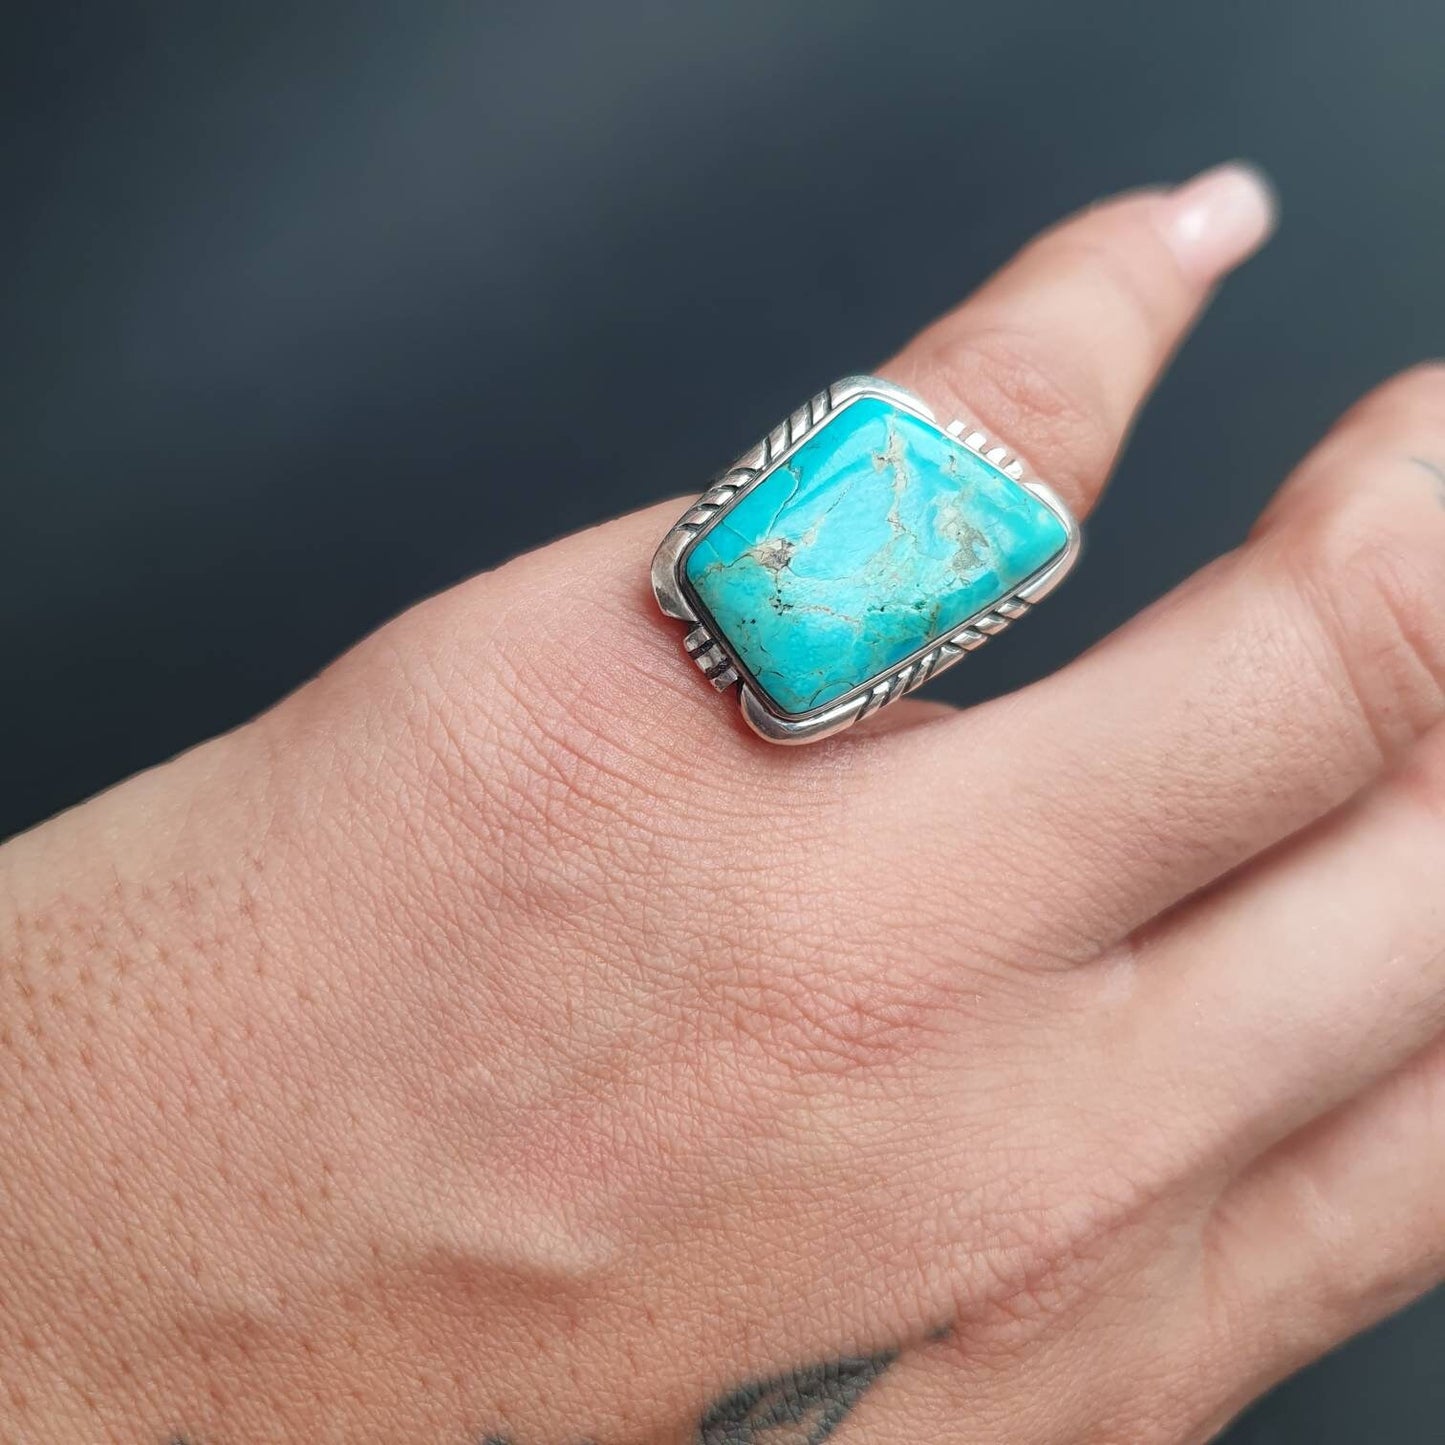 Turquoise ring, Navajo ring,signed jewellery, indian South Western ring,Turquoise gemstone, Unisex ring,statement ring,